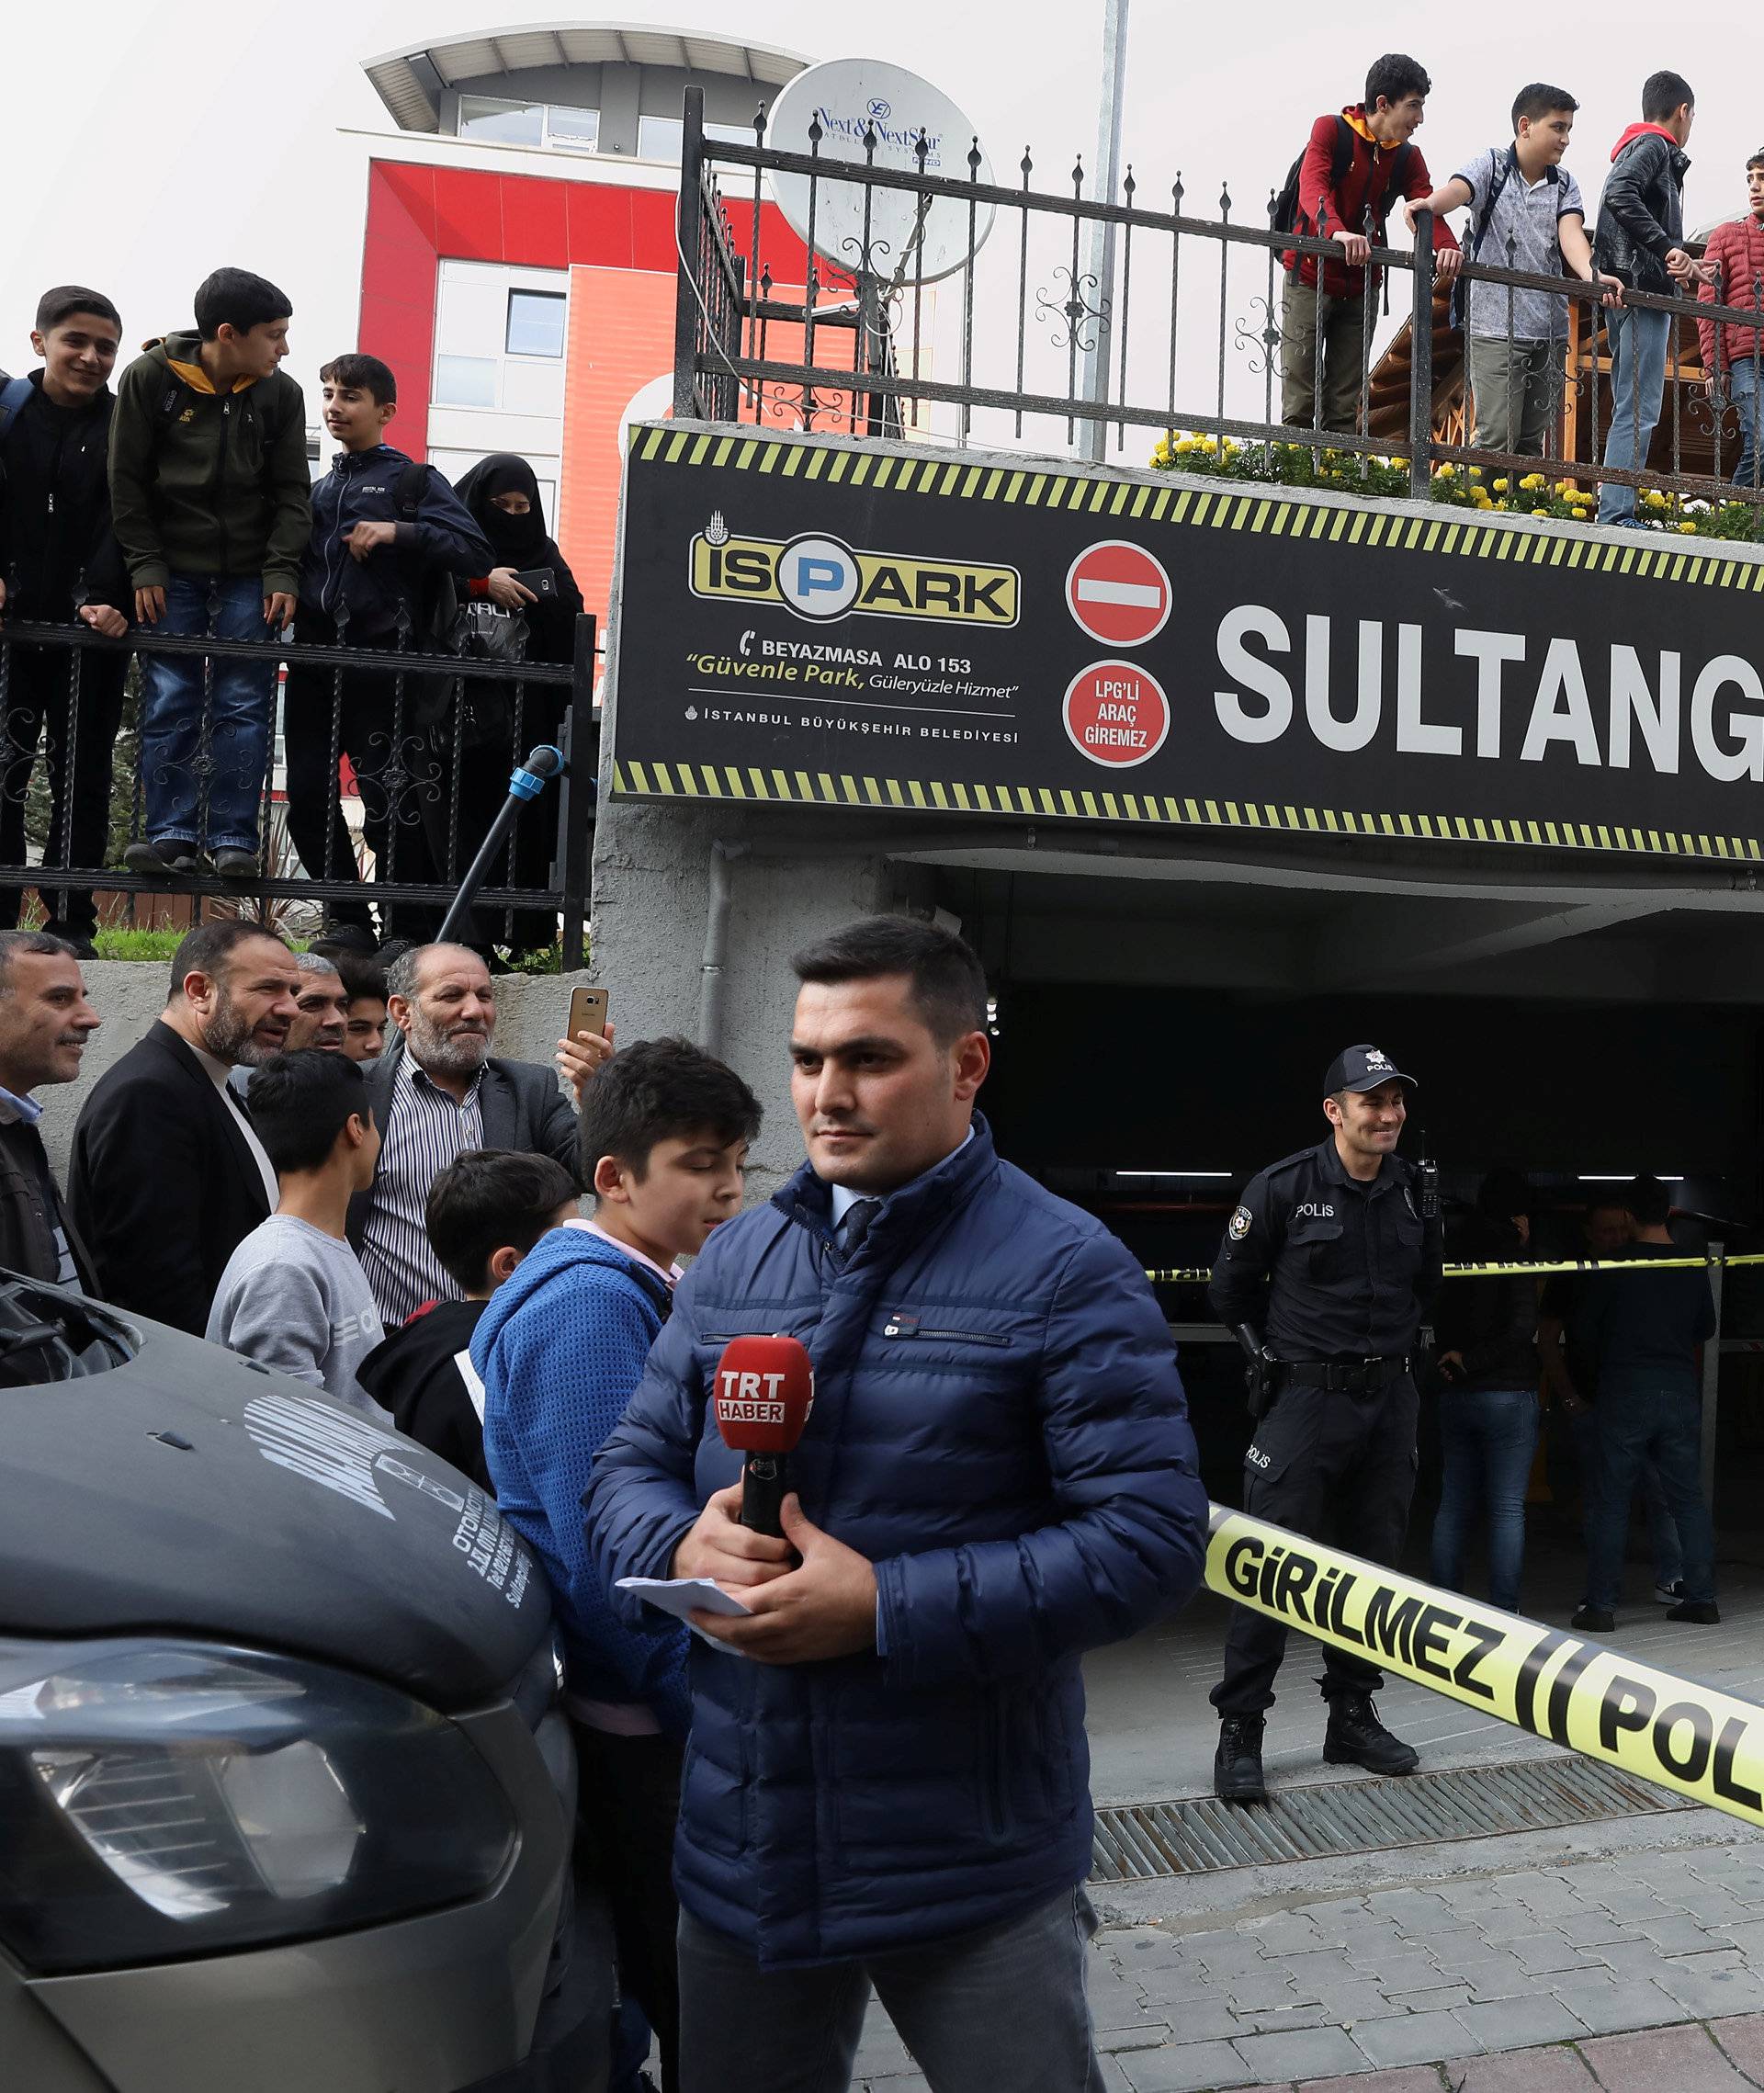 Turkish police officers stand guard at the entrance of a car park where a vehicle belonging to Saudi Arabia's consulate was found, in Istanbul